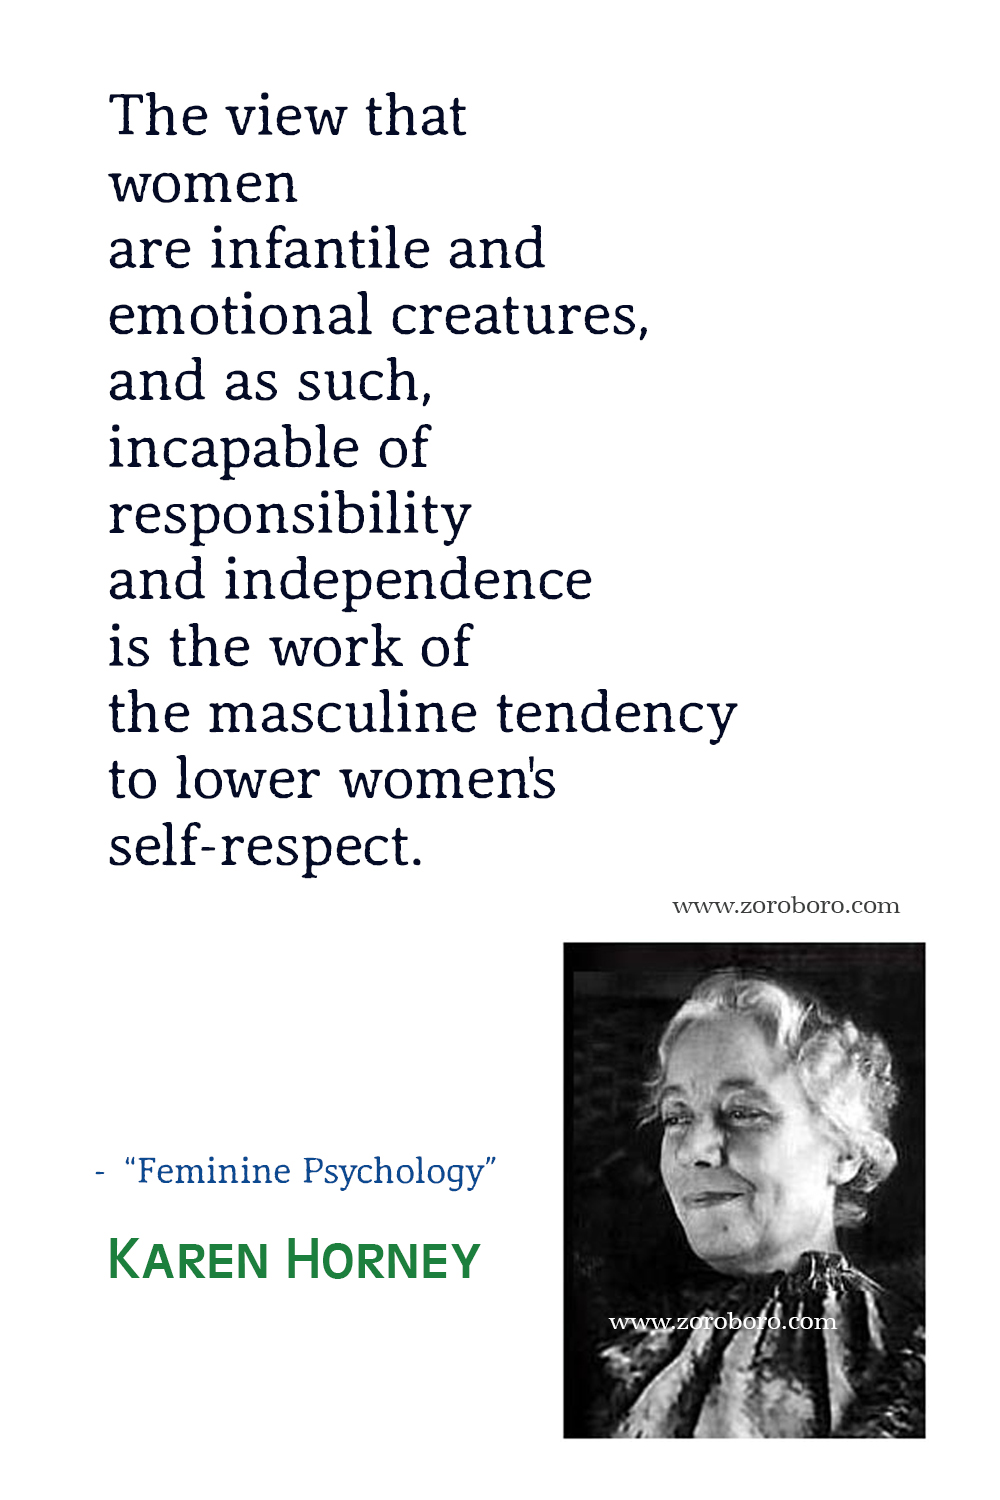 Karen Horney Quotes, Karen Horney Personality Theory, Karen Horney Feminist Psychology, Karen Horney Neurosis and Human Growth Quotes, Karen Horney Books Quotes.